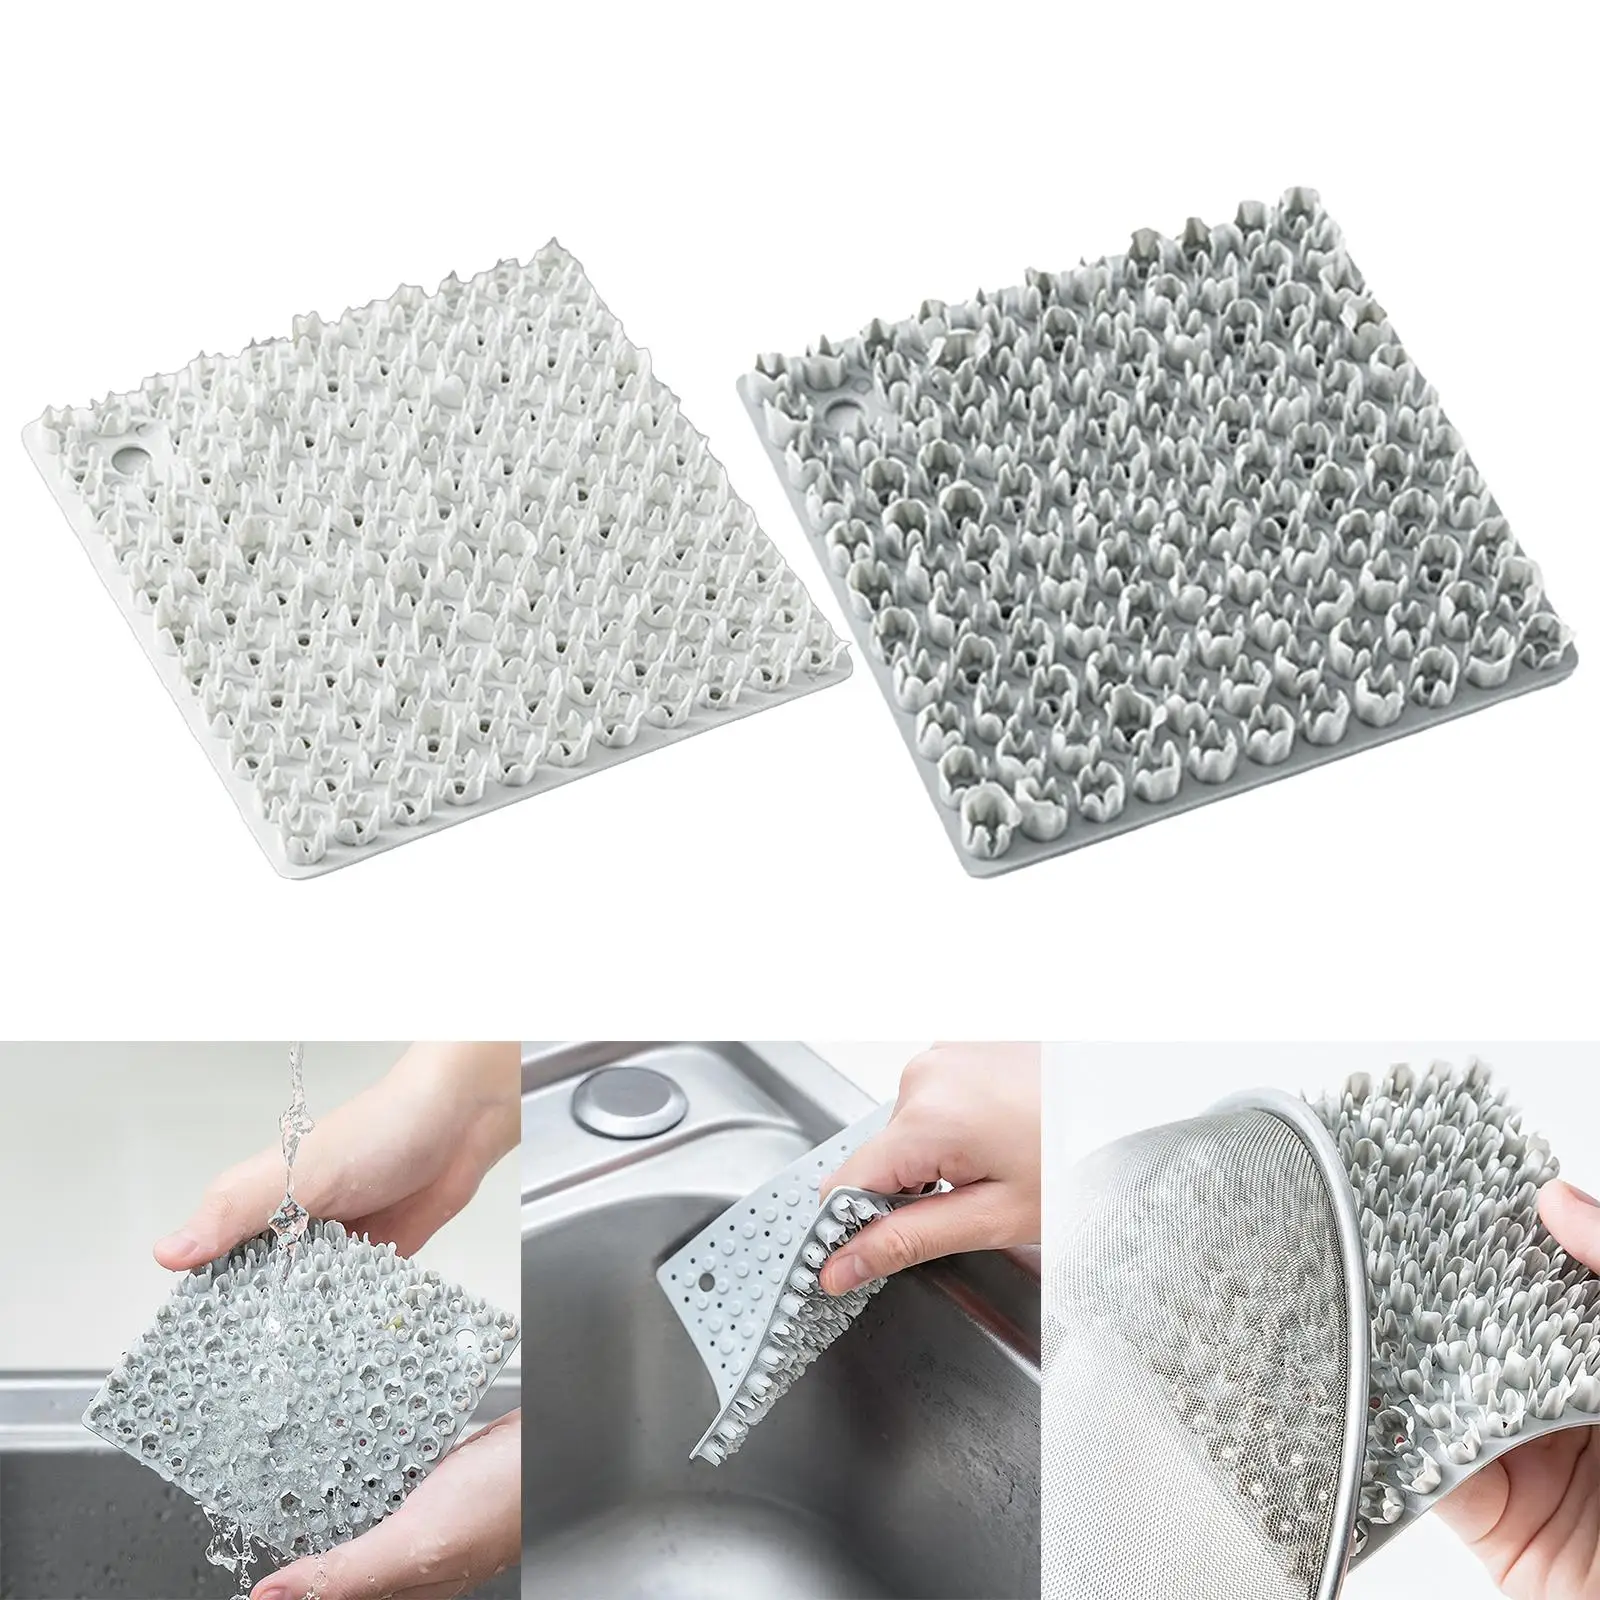 Multi Function Vegetable Fruit Brush Kitchen Accessories Insulation Pads Accessoies Supply Tool for Pot Bathroom Sink Dishes Pan